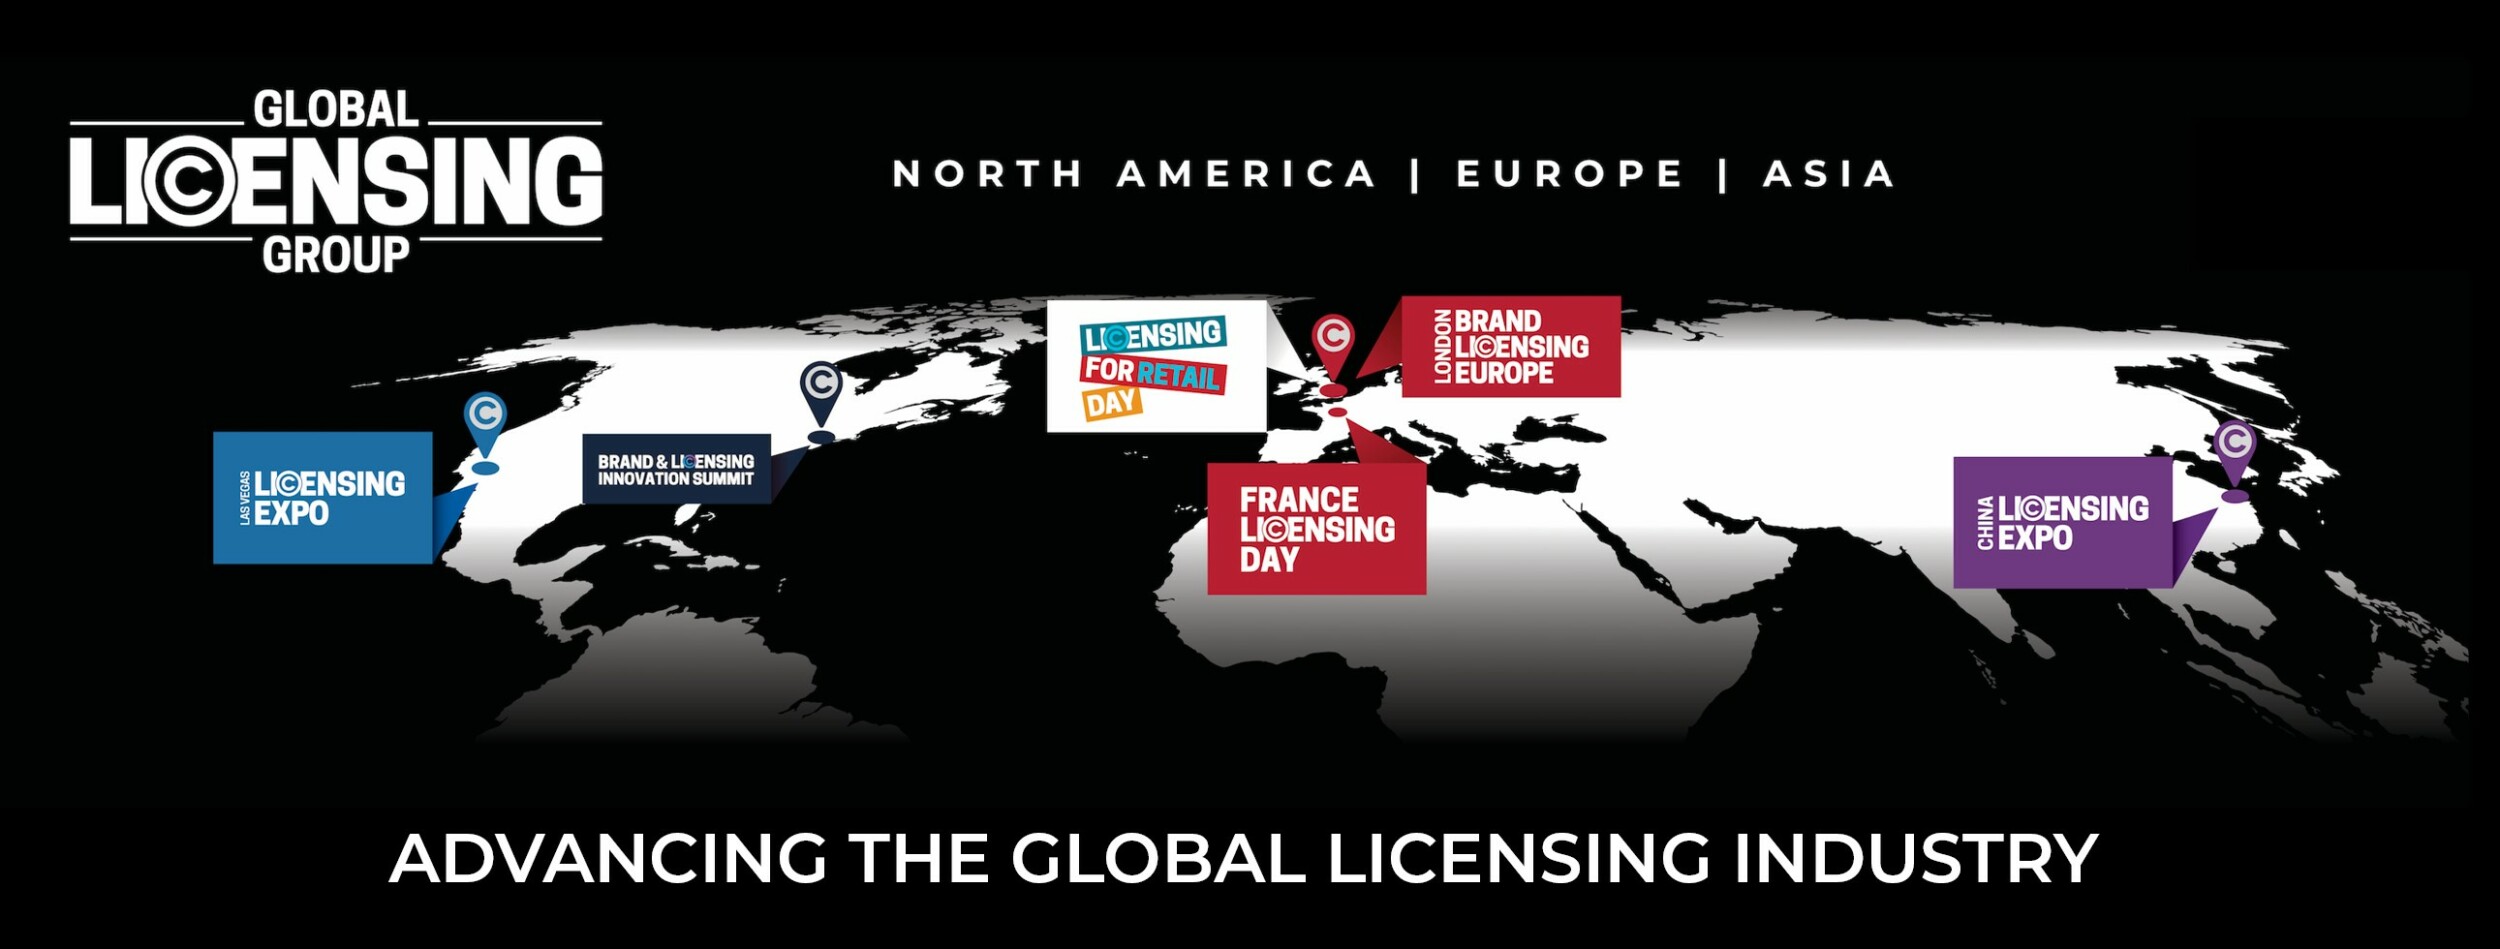 Future dates for Licensing Expo, BLE and more confirmed